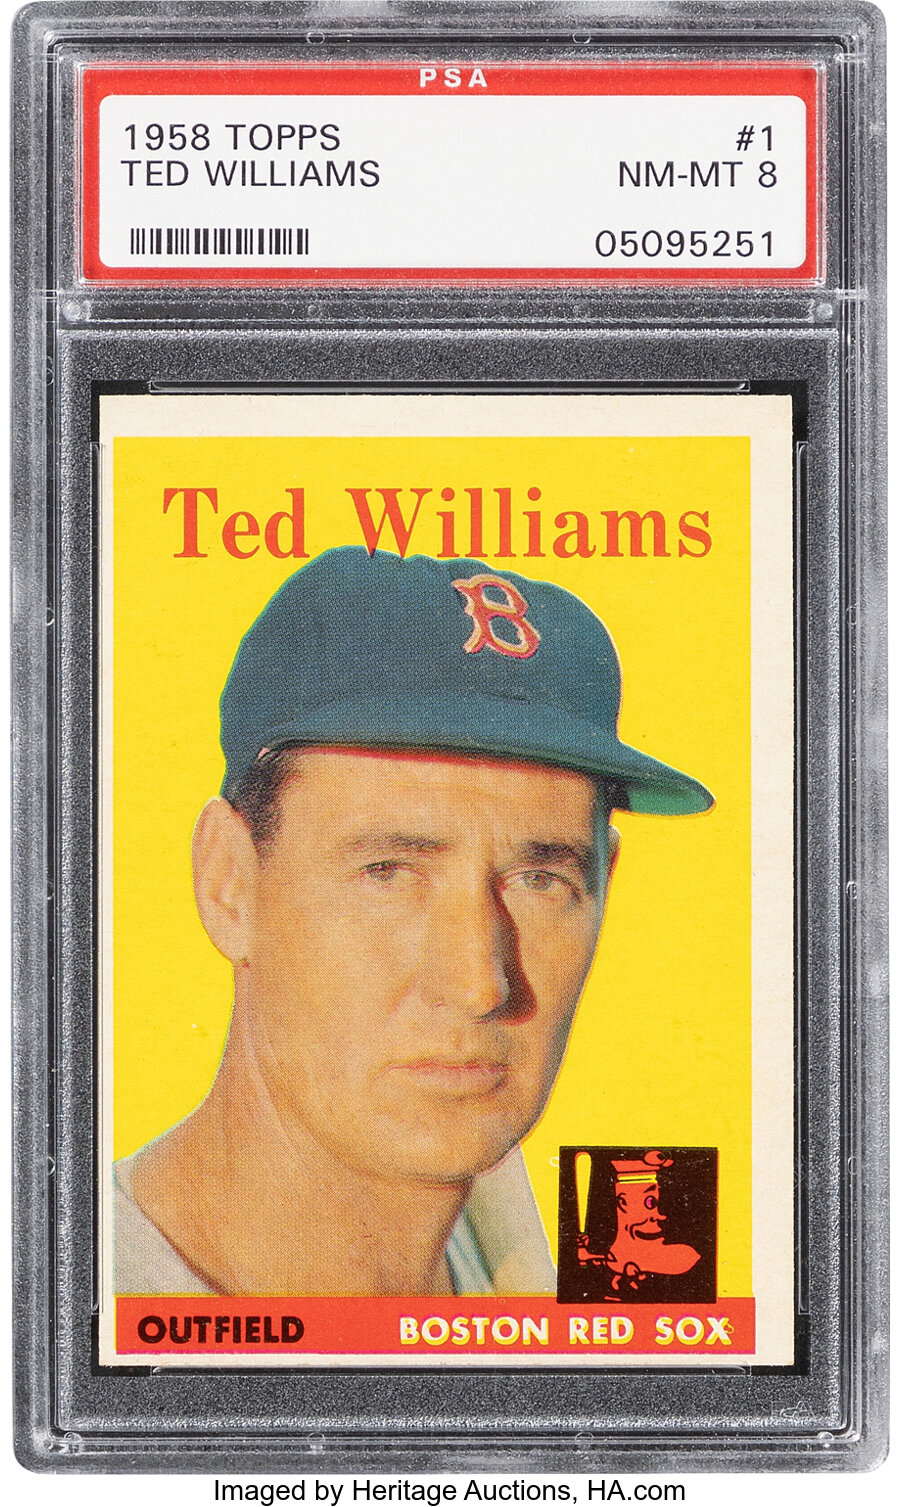 1958 Topps Ted Williams #1 PSA NM-MT 8